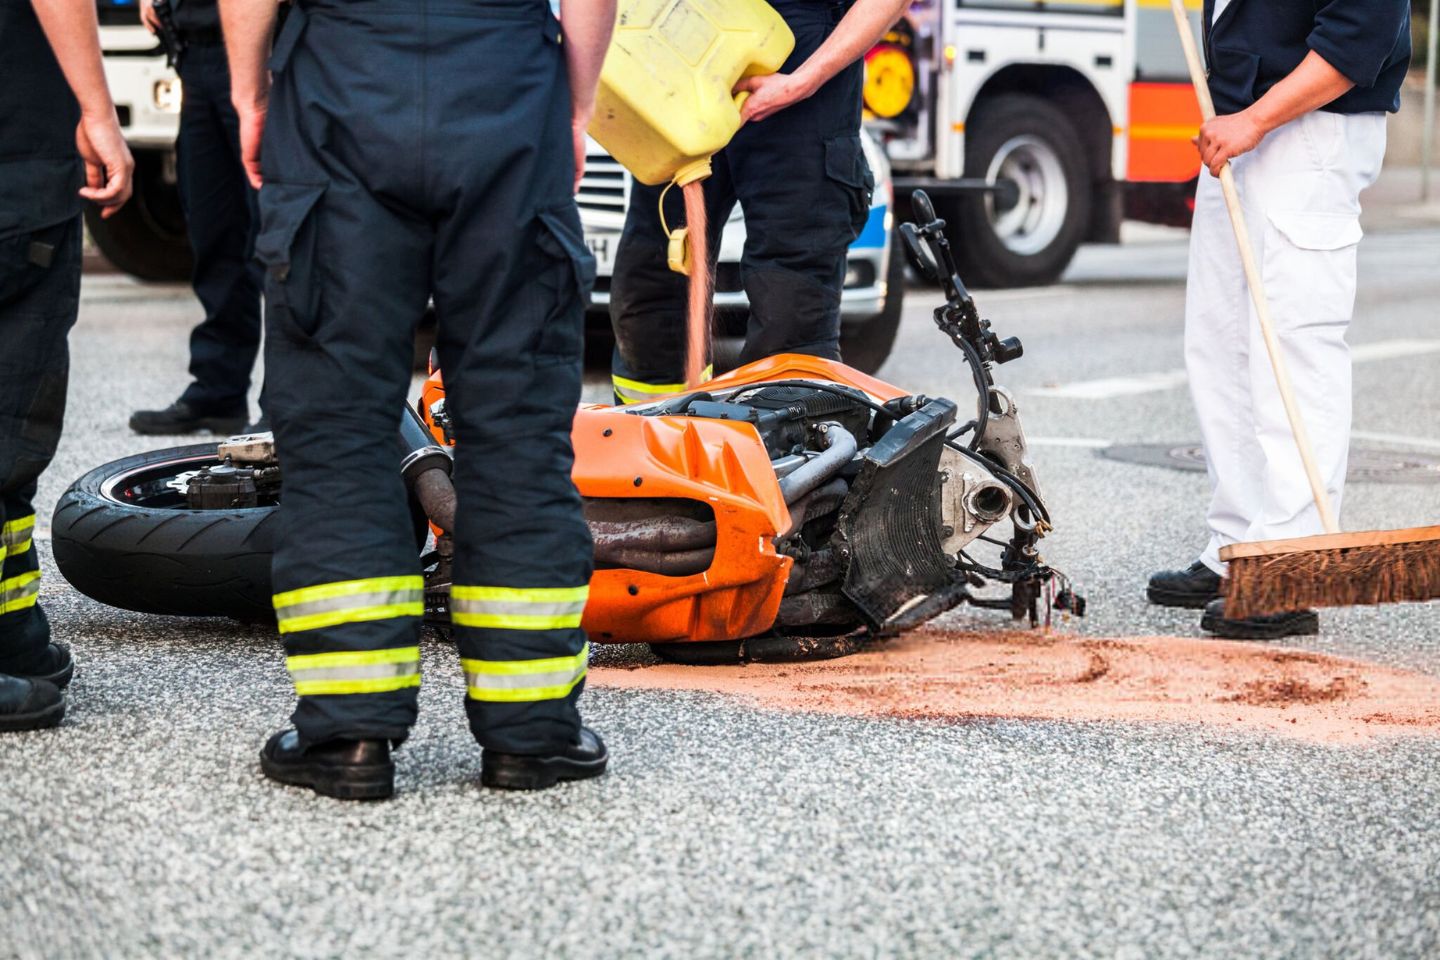 Immediate Steps to Take After a Motorcycle Accident